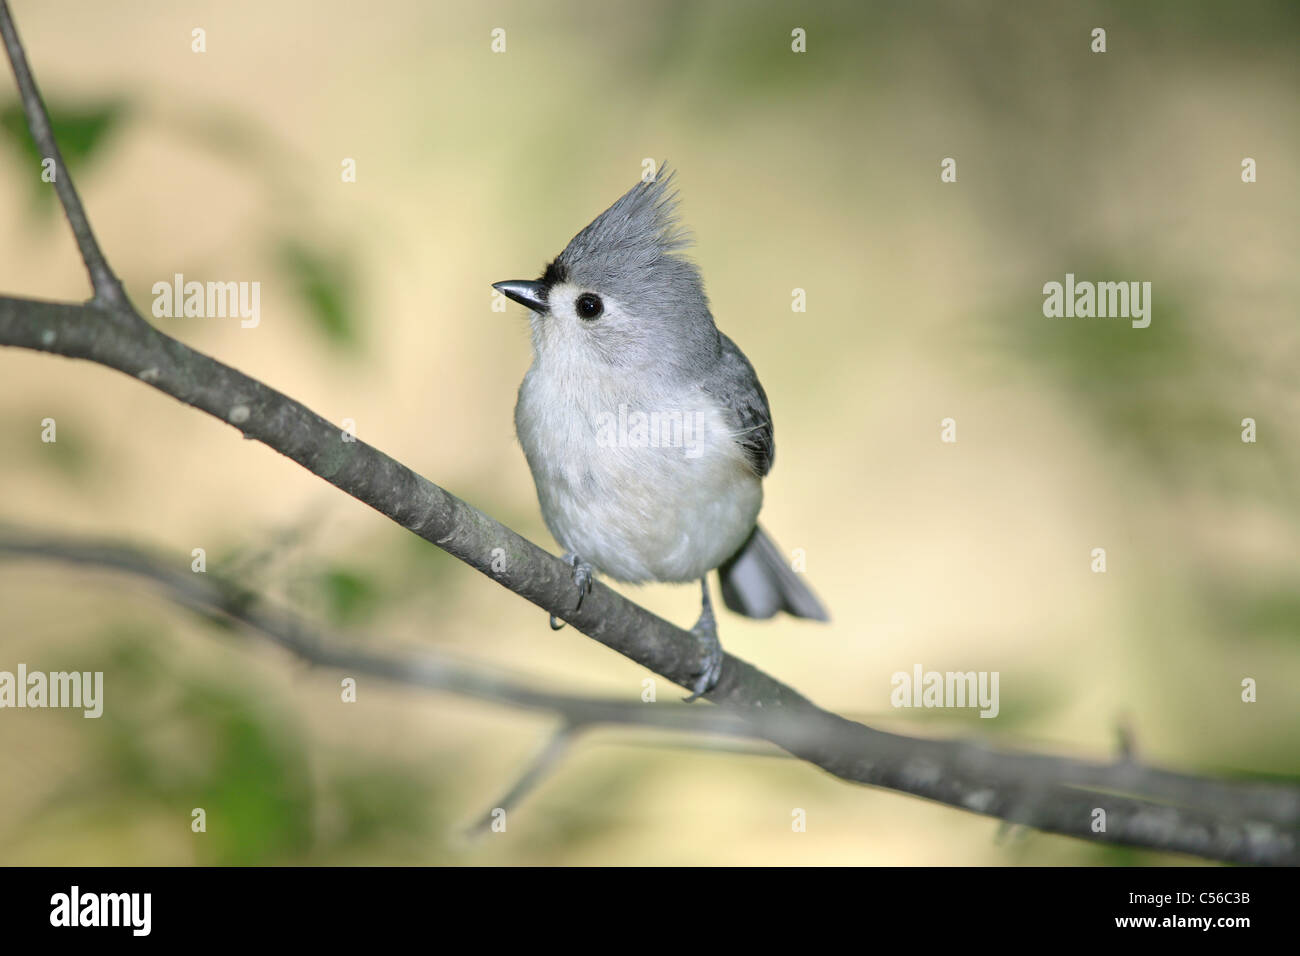 A Tiny Bird, The Tufted Titmouse Striking A Curious Pose, Parus bicolor Stock Photo